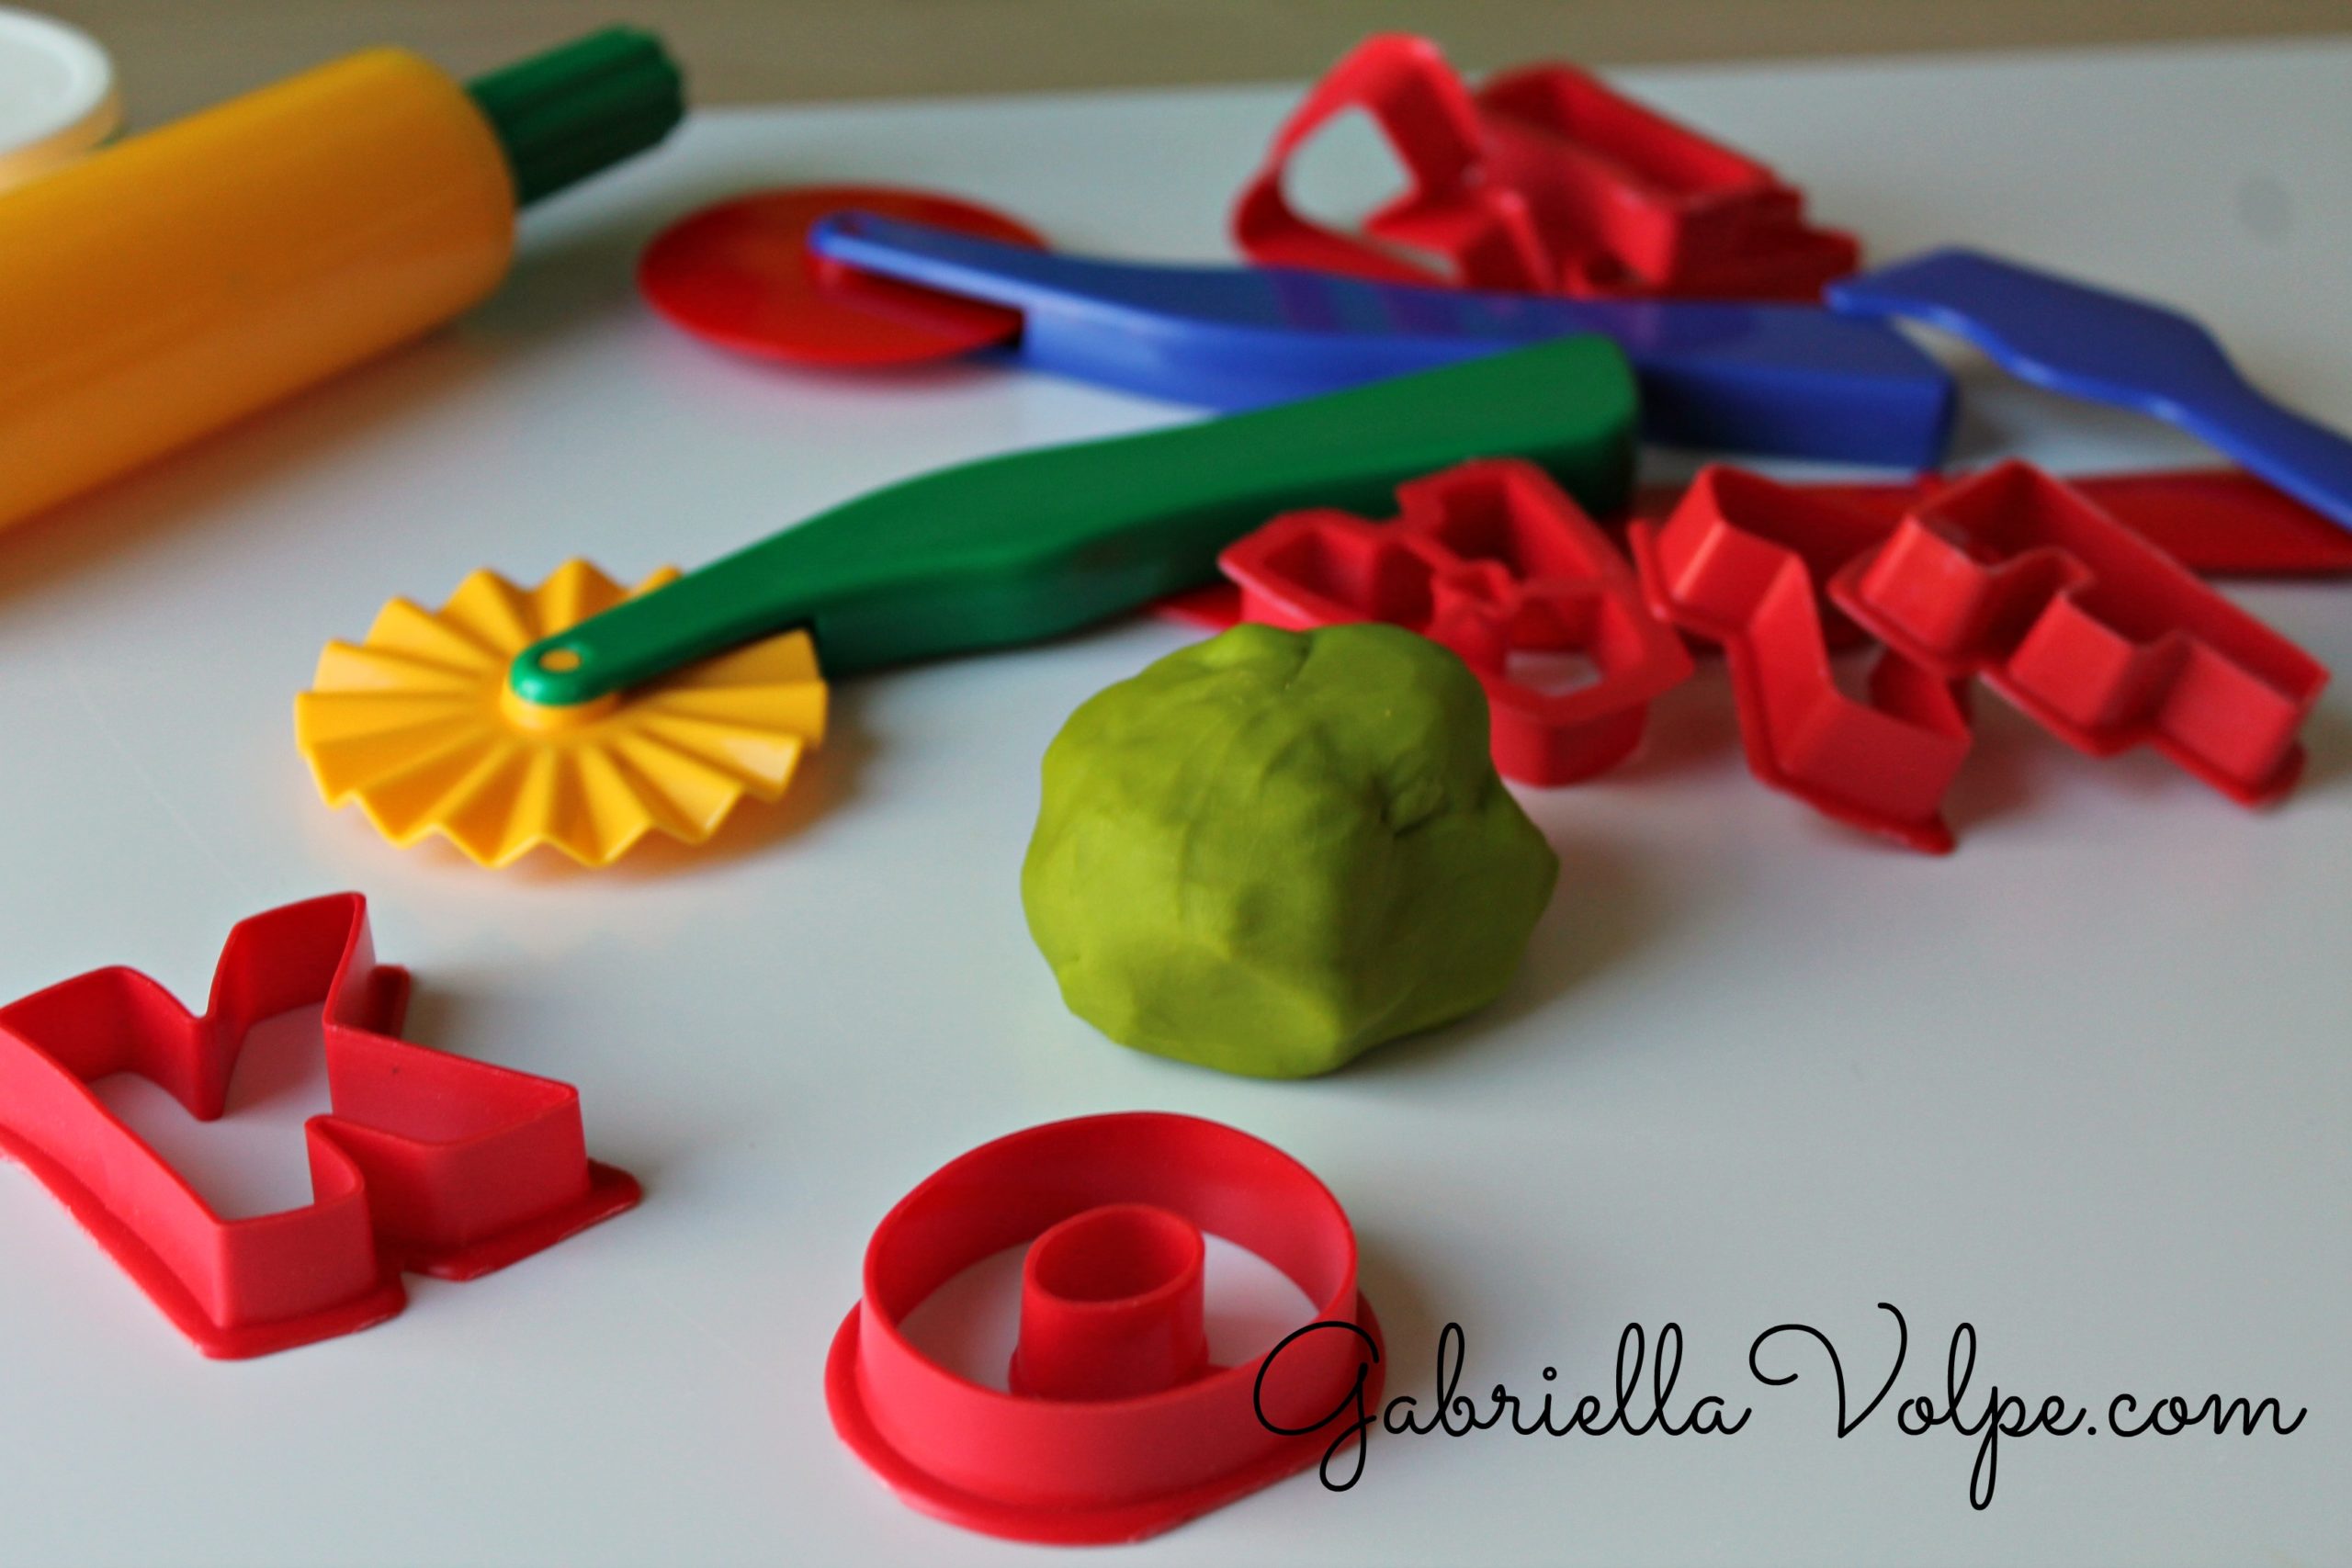 https://gabriellavolpe.com/wp-content/uploads/2013/10/Tips-for-using-playdough-with-the-child-with-special-needs-scaled.jpg